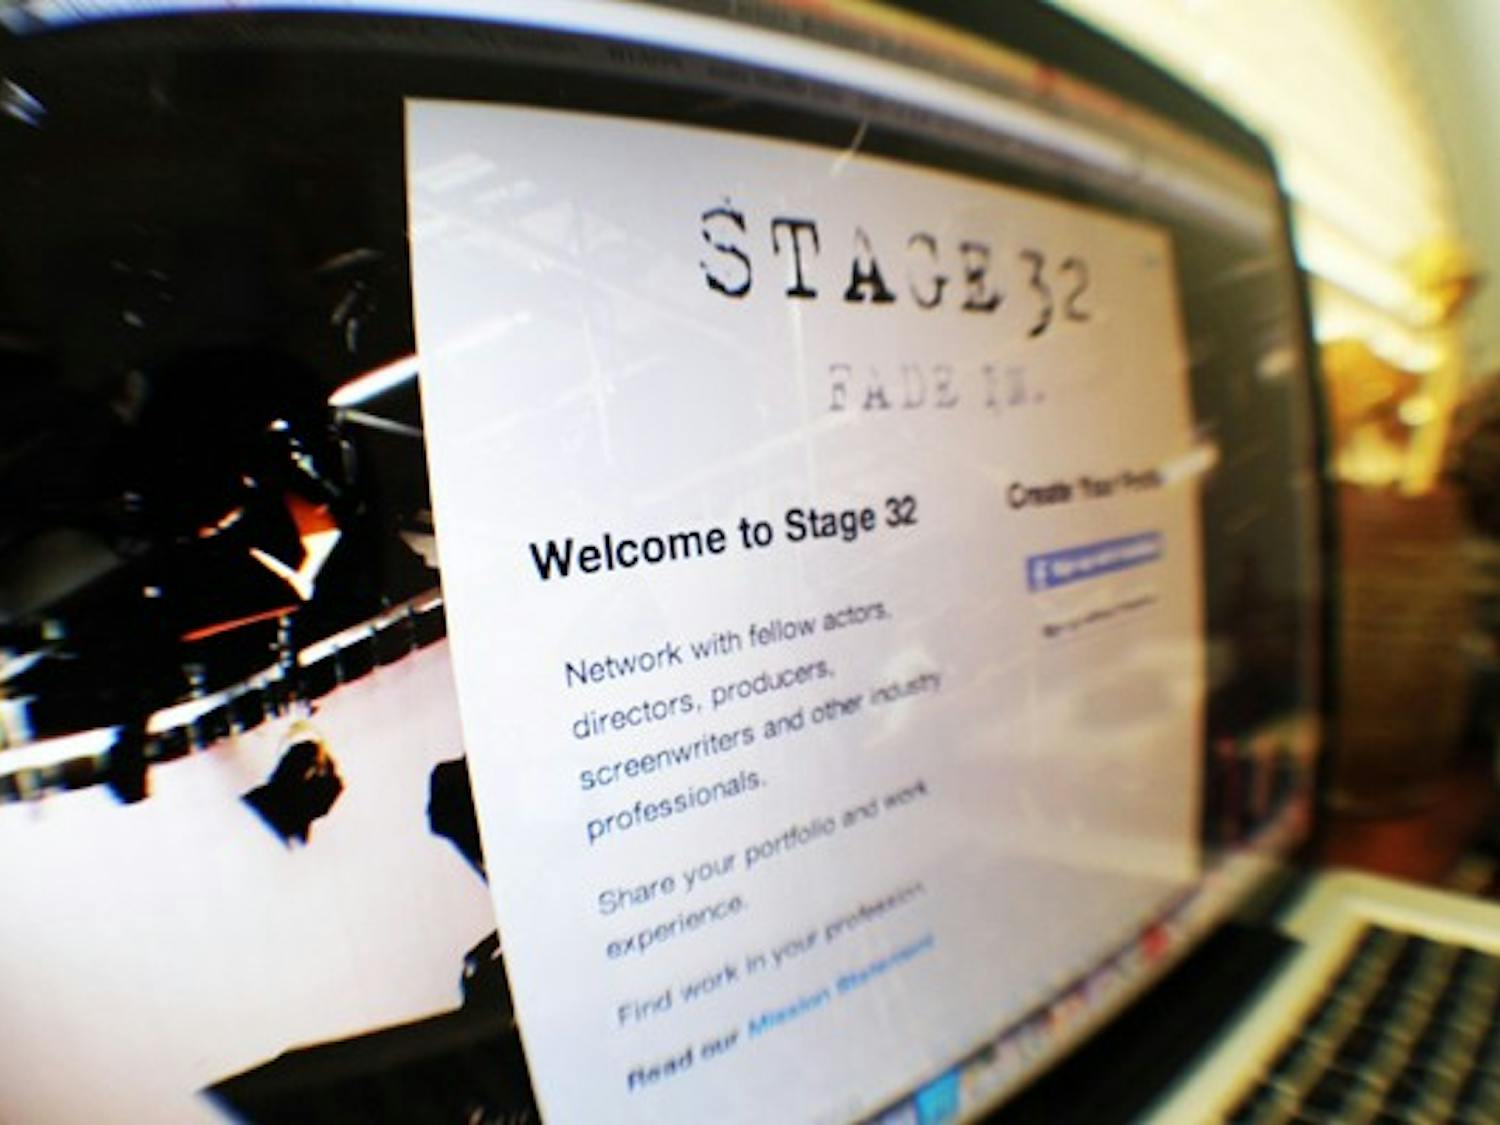 GETTING CONNECTED: Stage 32 is a new social media site created by ASU alumnus Curt Blakeney that links film students with professionals. (Photo by Rosie Gochnour)